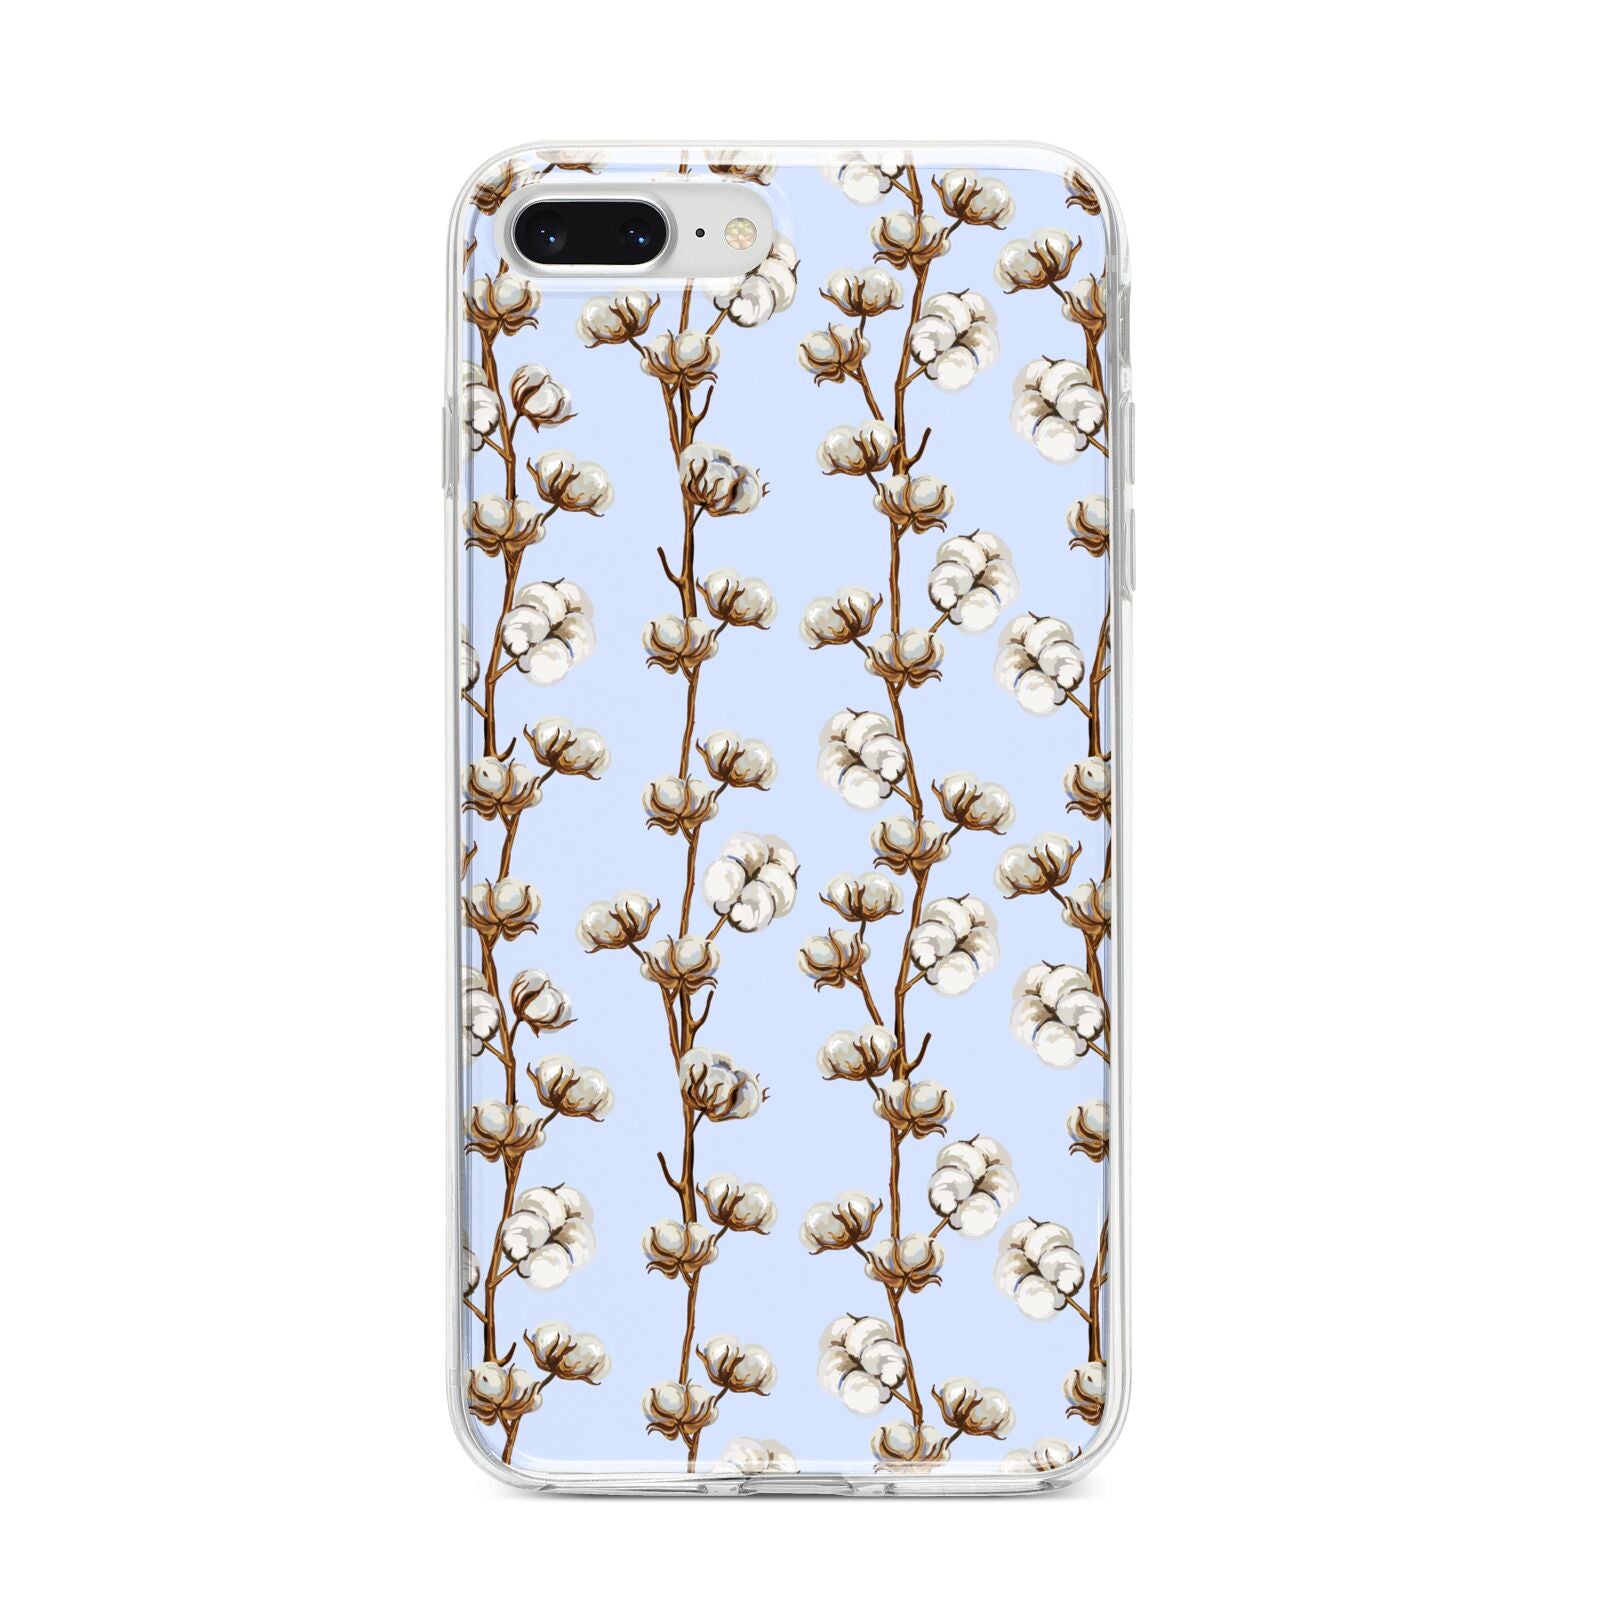 Cotton Branch iPhone 8 Plus Bumper Case on Silver iPhone